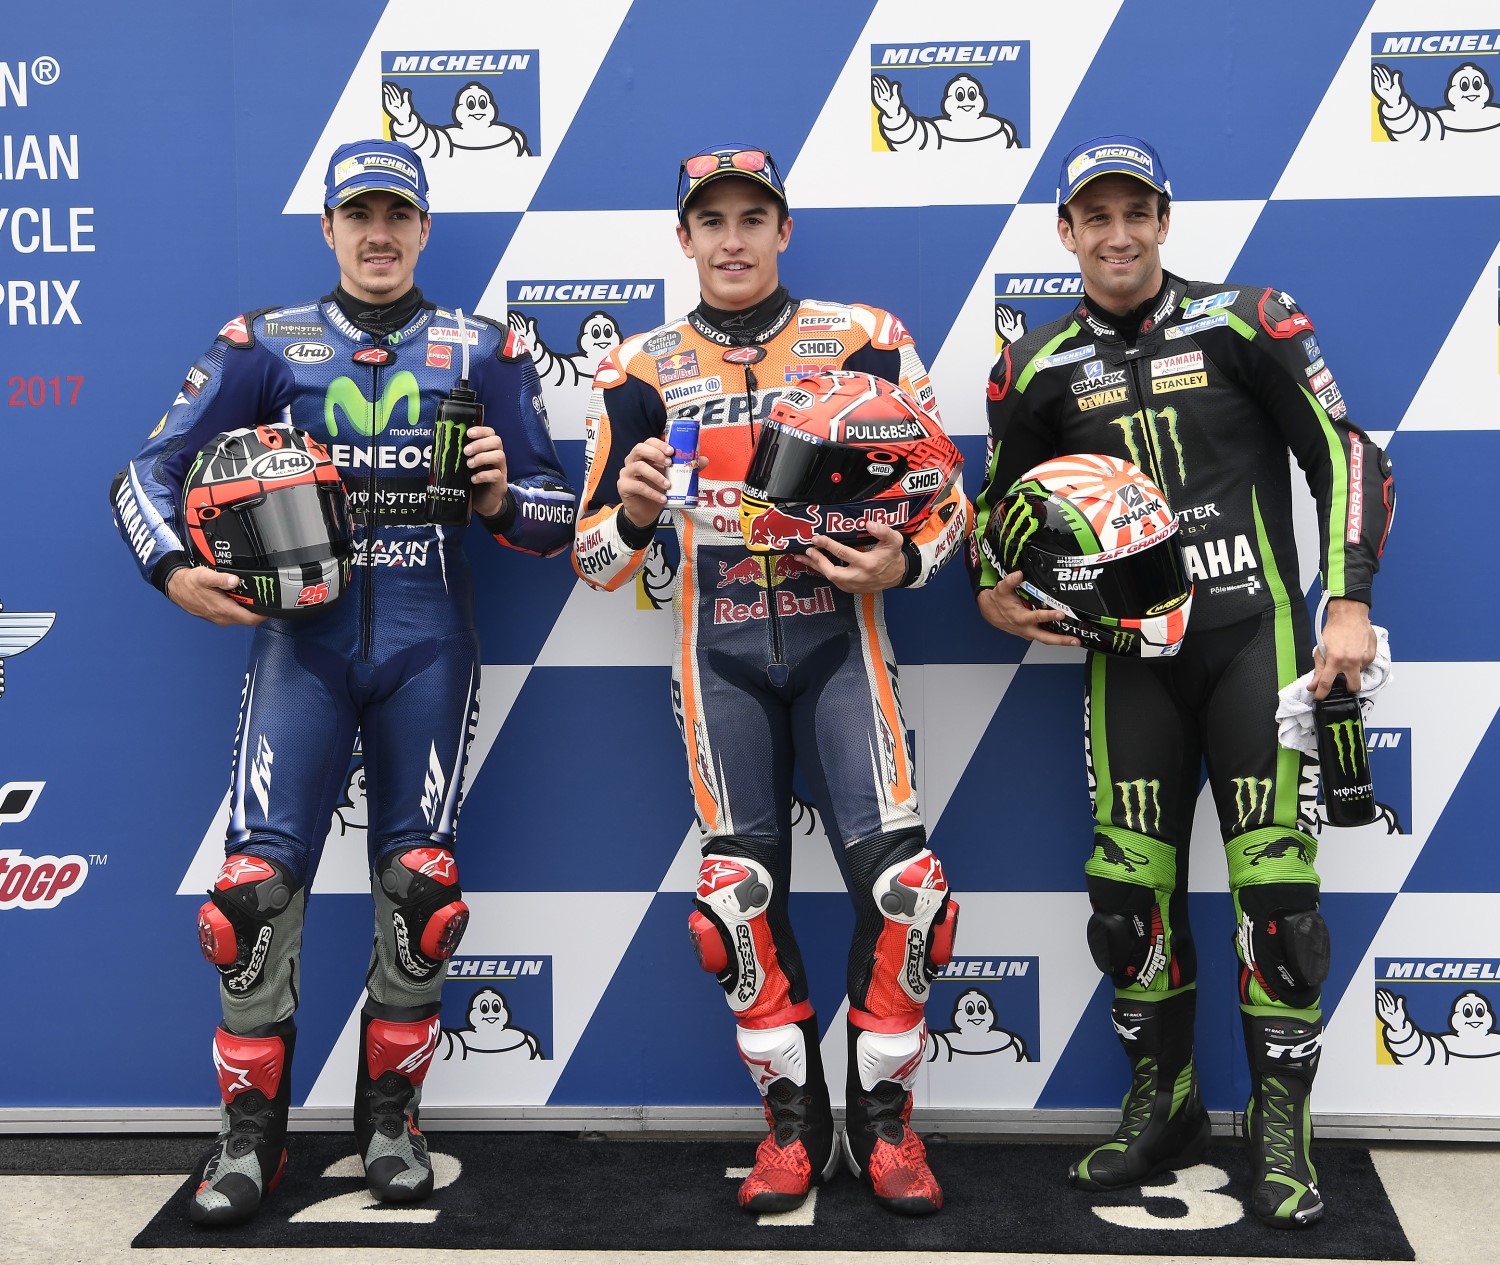 From left, Vinales, Marquez and Zarco